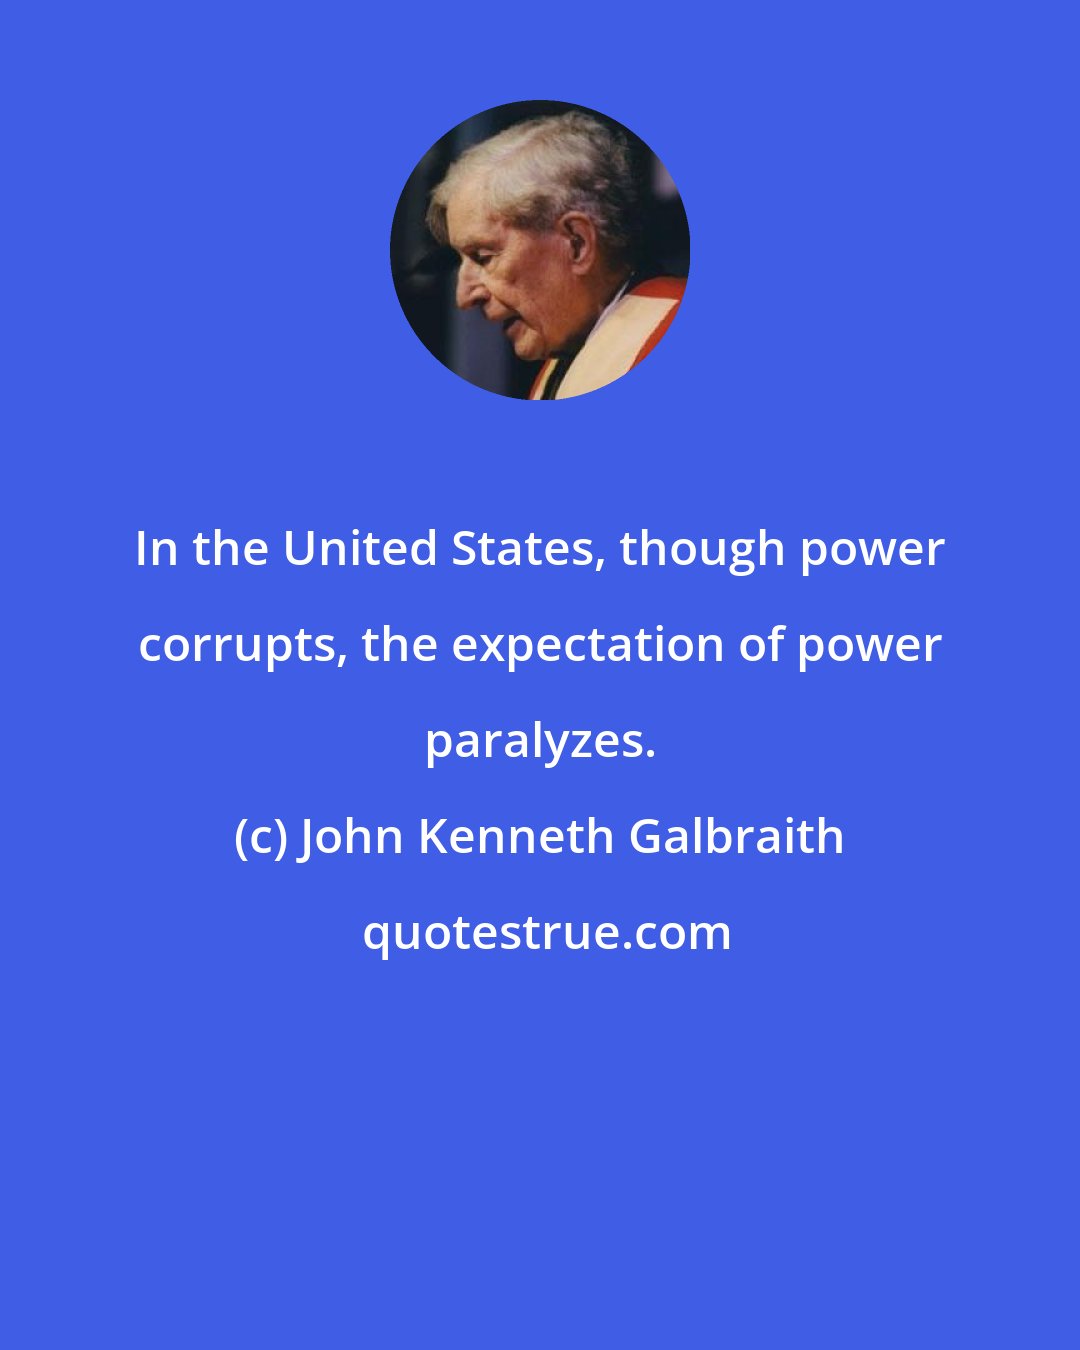 John Kenneth Galbraith: In the United States, though power corrupts, the expectation of power paralyzes.